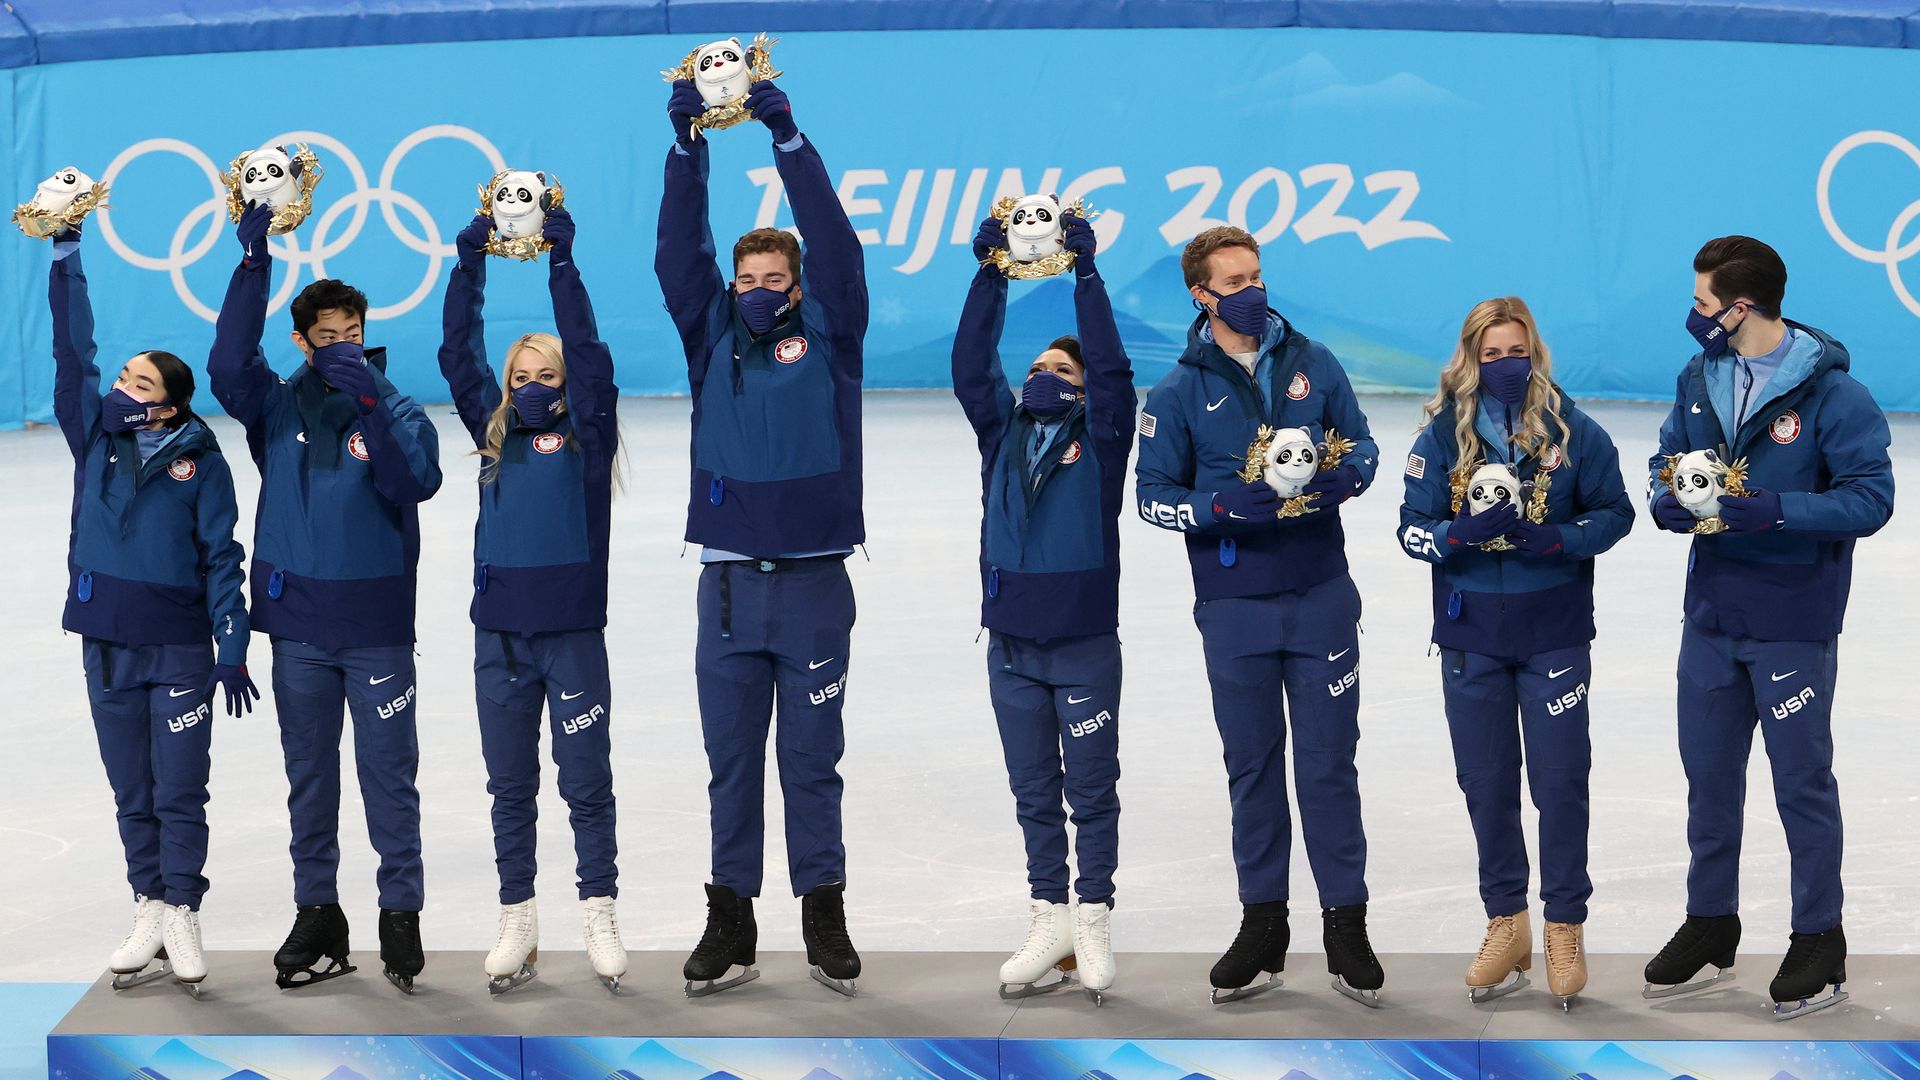 Then-silver medalists Alexa Knierim, Brandon Frazier, Madison Chock, Evan Bates, Karen Chen, Nathan Chen, Vincent Zhou, Madison Hubbell, Zachary Donohue of Team USA at the 2022 Winter Olympic Games at Capital Indoor Stadium in Beijing, China.